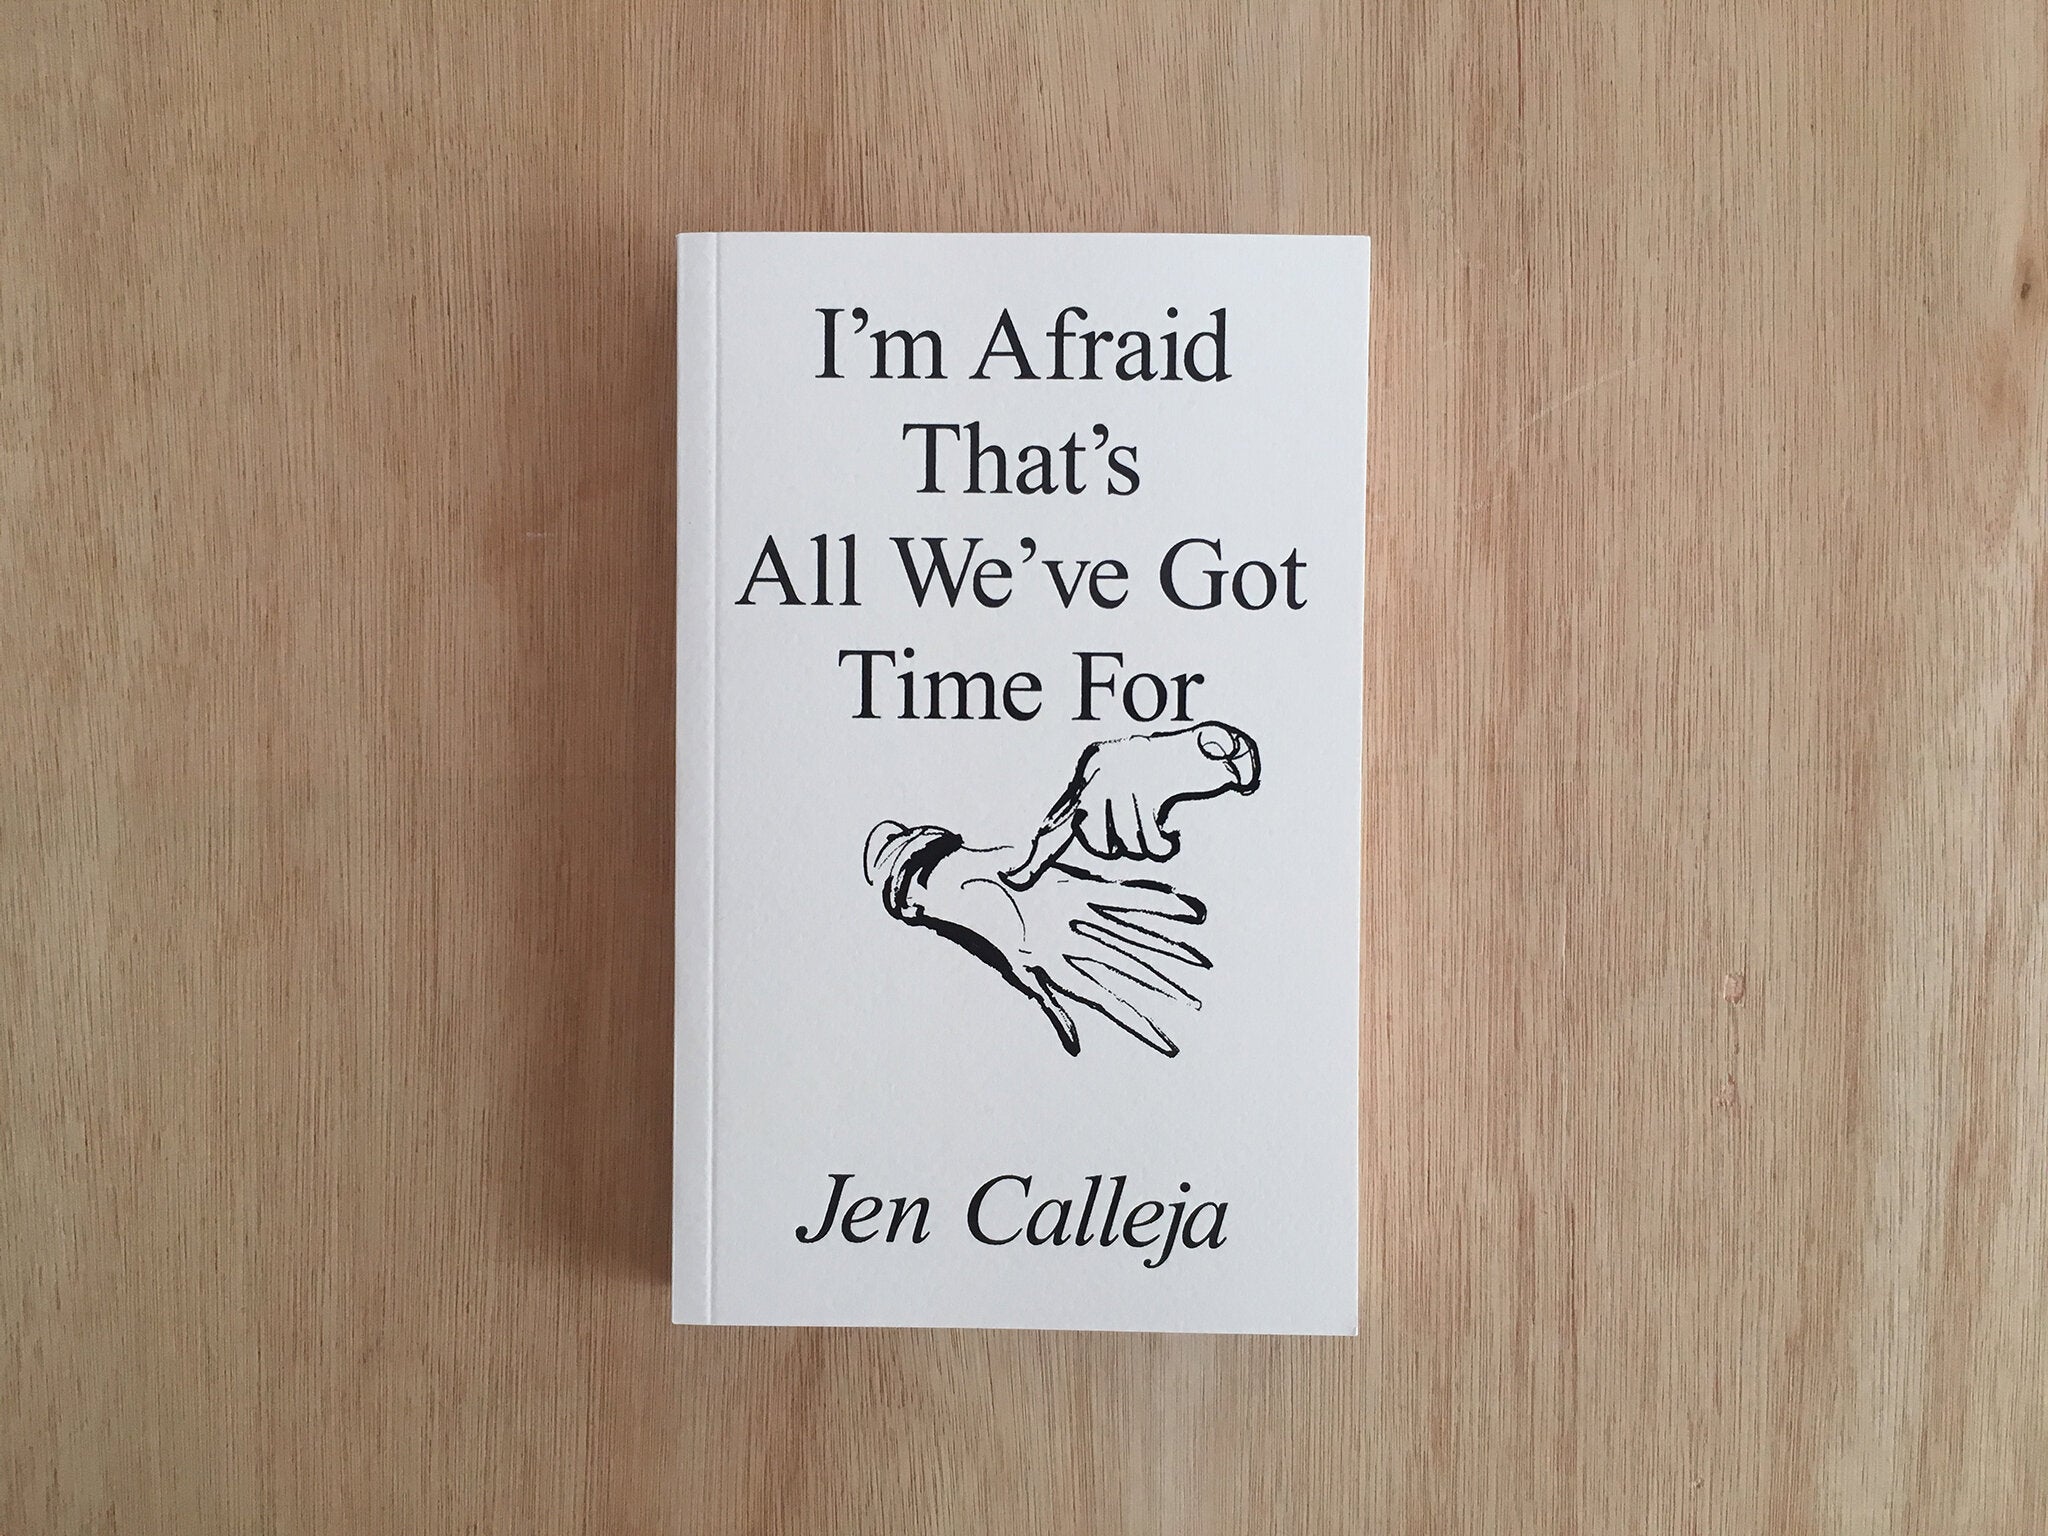 I'M AFRAID THAT'S ALL WE'VE GOT TIME FOR by Jen Calleja